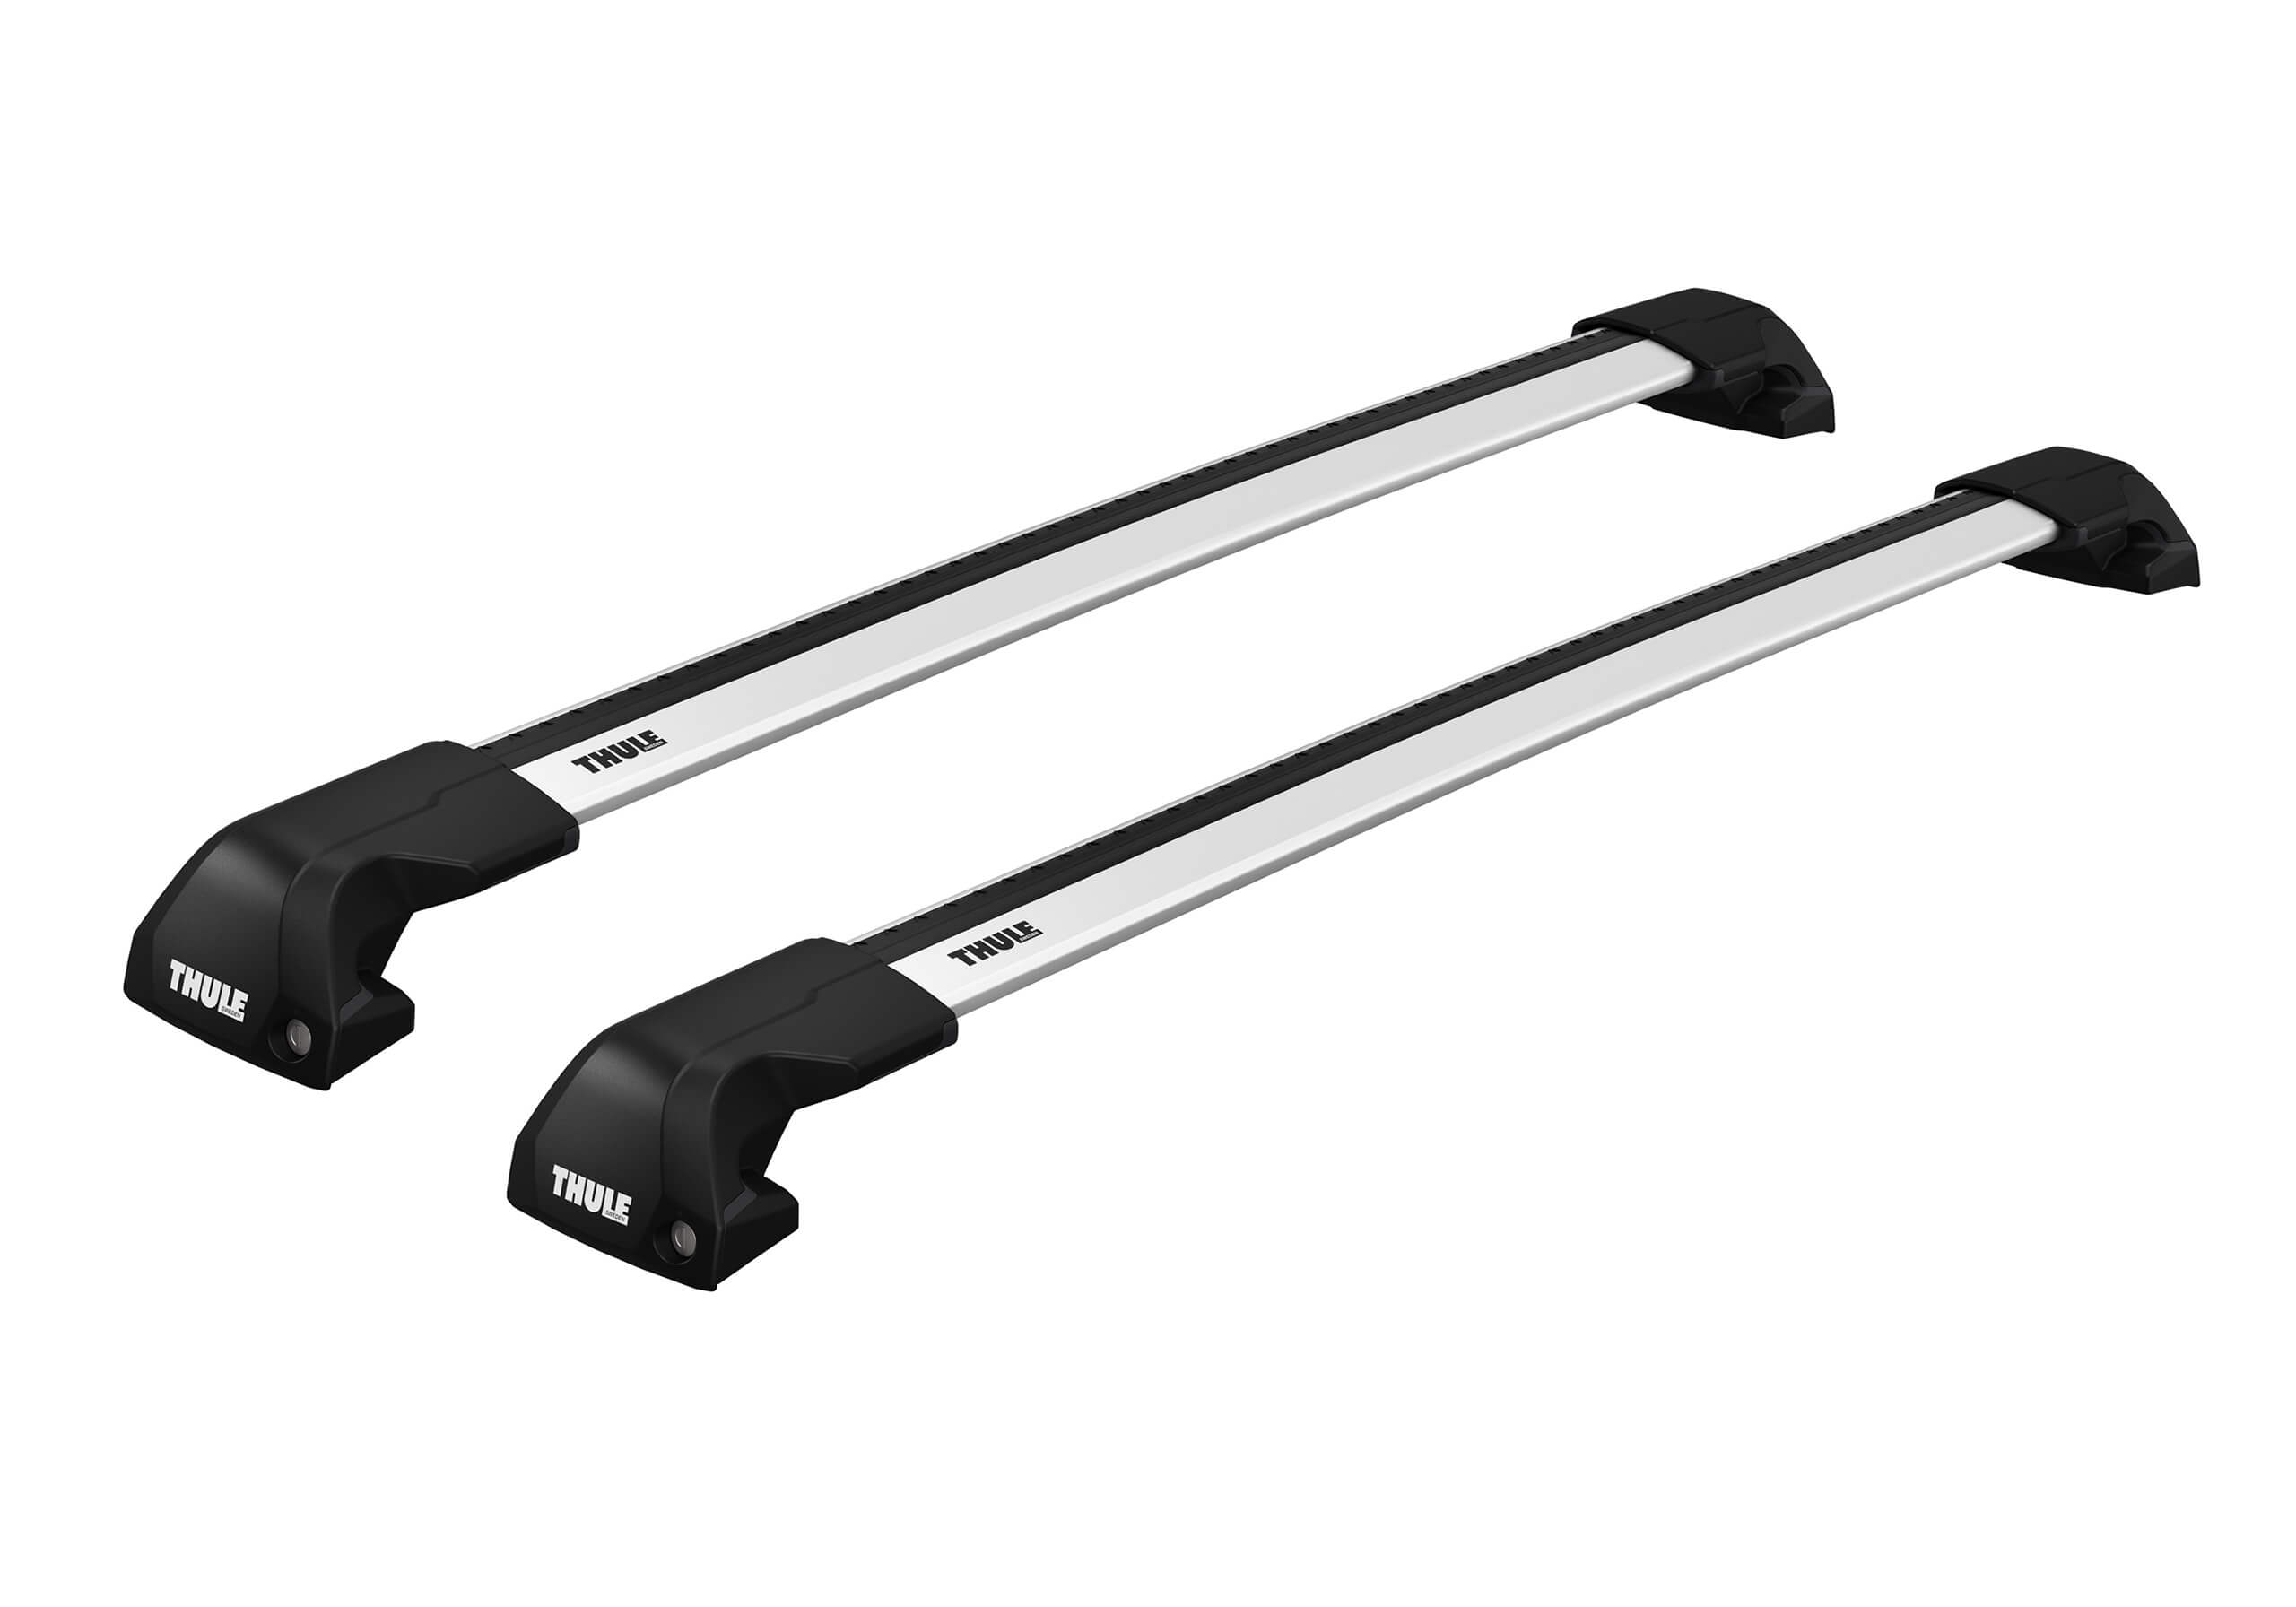 Ford Focus estate (2011 to 2018):Thule Edge silver WingBars package - 7206, 7213, 7212, 6022